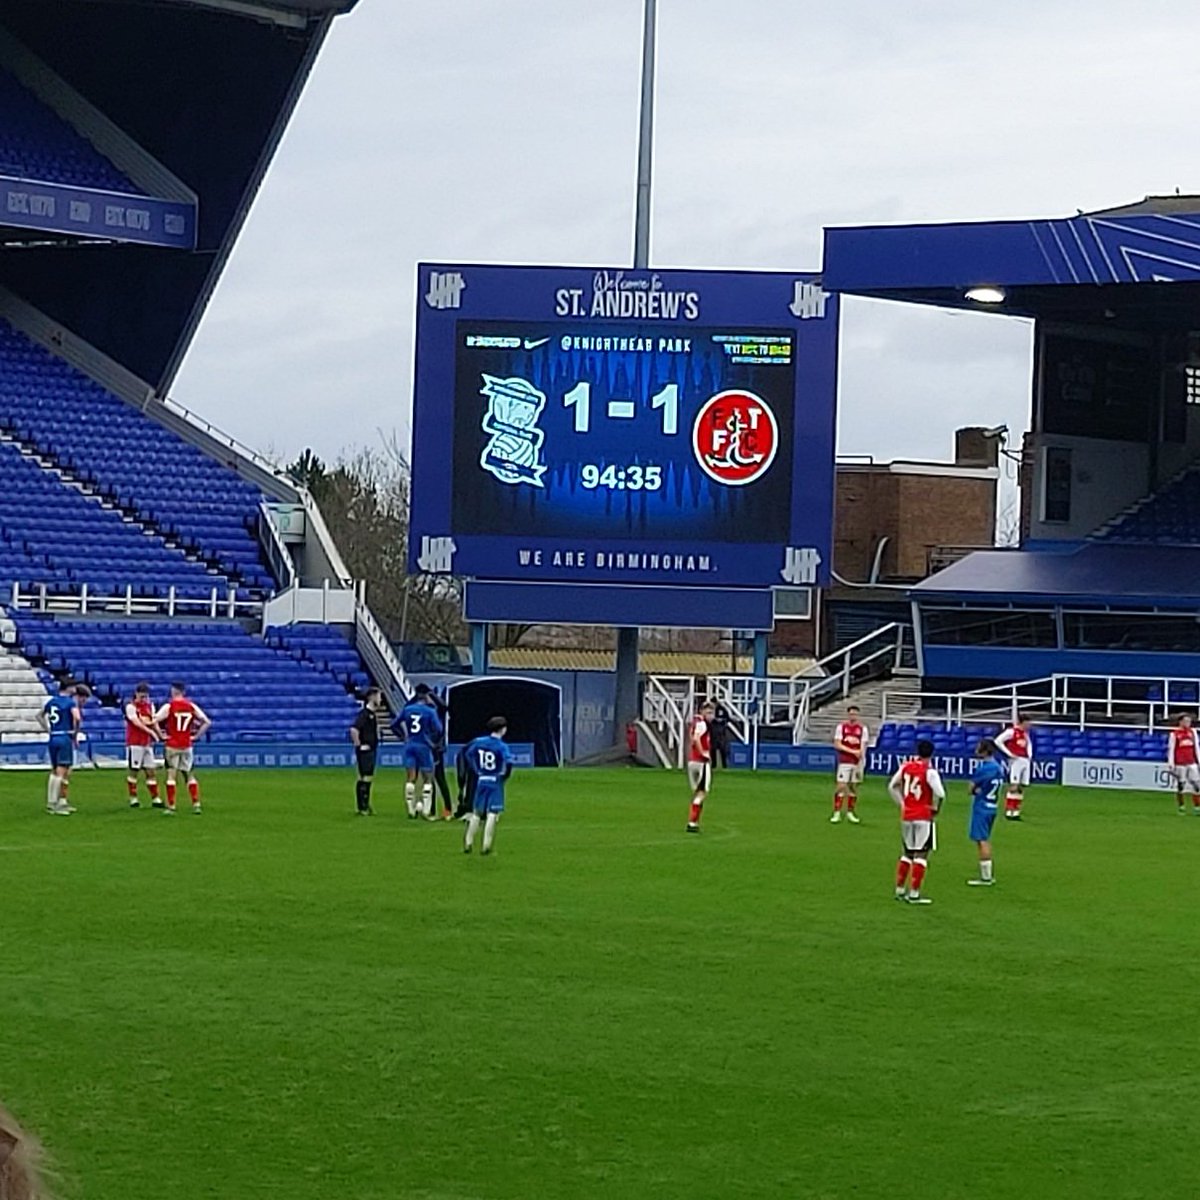 Close call at the end with Fleetwood having a shot hit the post and then saved by Sayer.

Hard fought game ending in a draw which is fair since Blues were at 10 men!

#BCFCu21s #BCFC #KRO